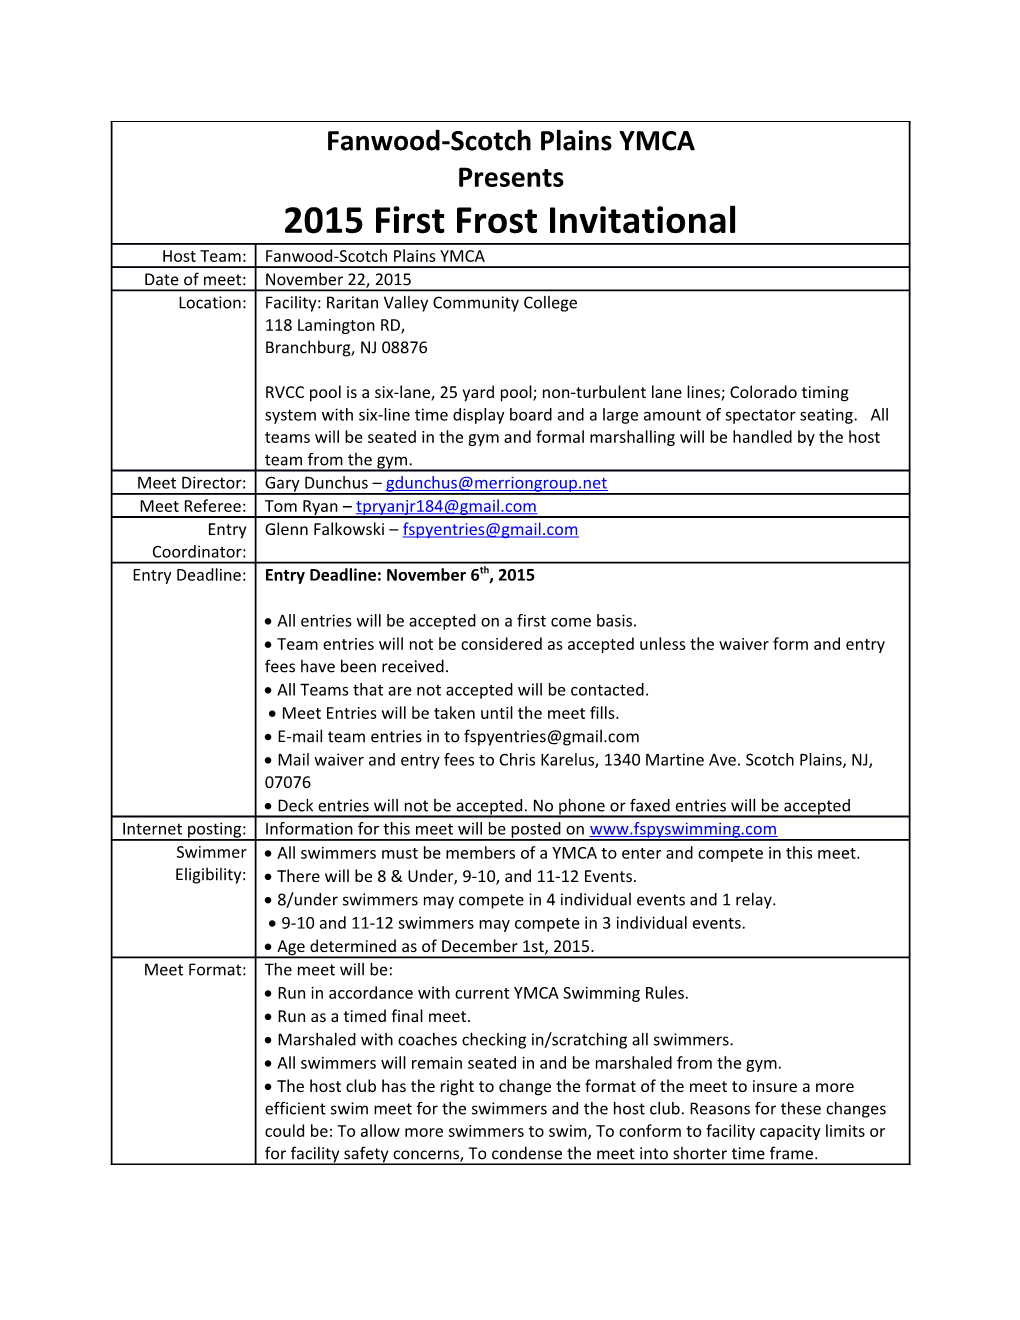 FSPY 2015 First Frost Invitational